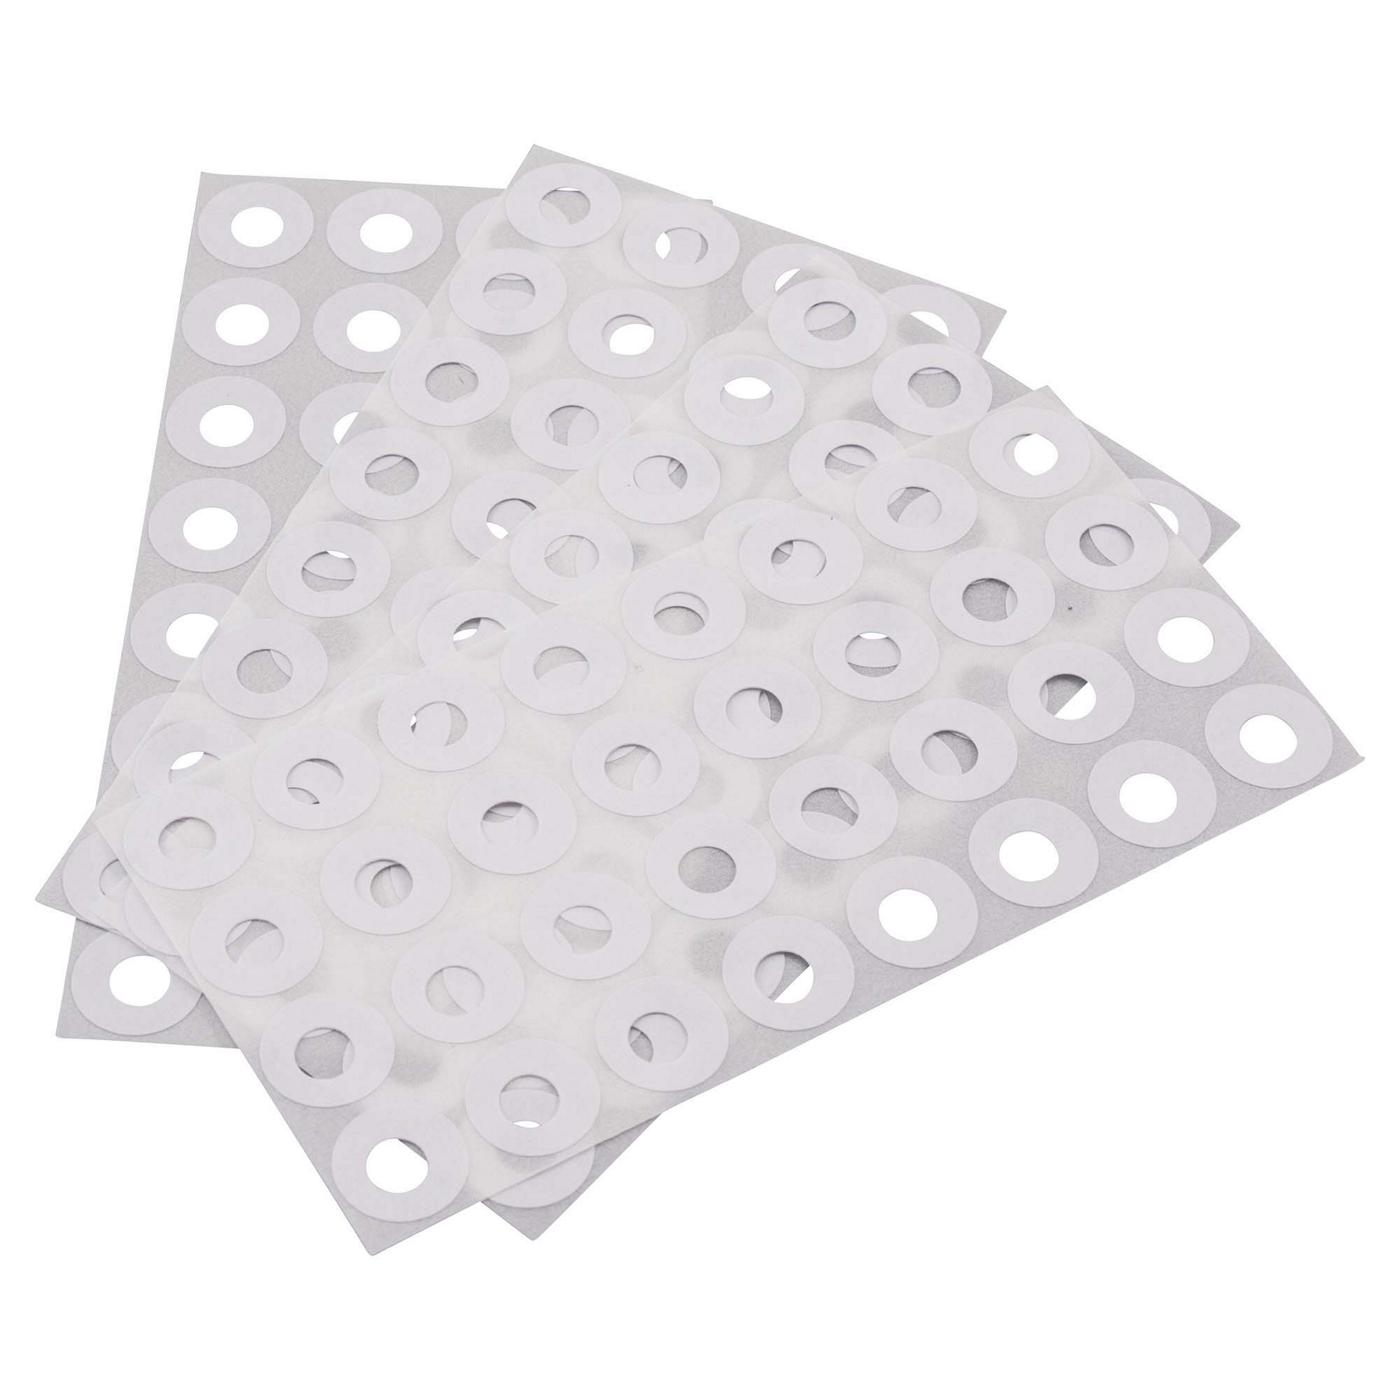 2 Box 500 Pack 0.25 inch Hole Reinforcement Labels, Self-Adhesive Reinforcement Ring Labels for Repairing and Strengthening Punch Holes (White+Clear)